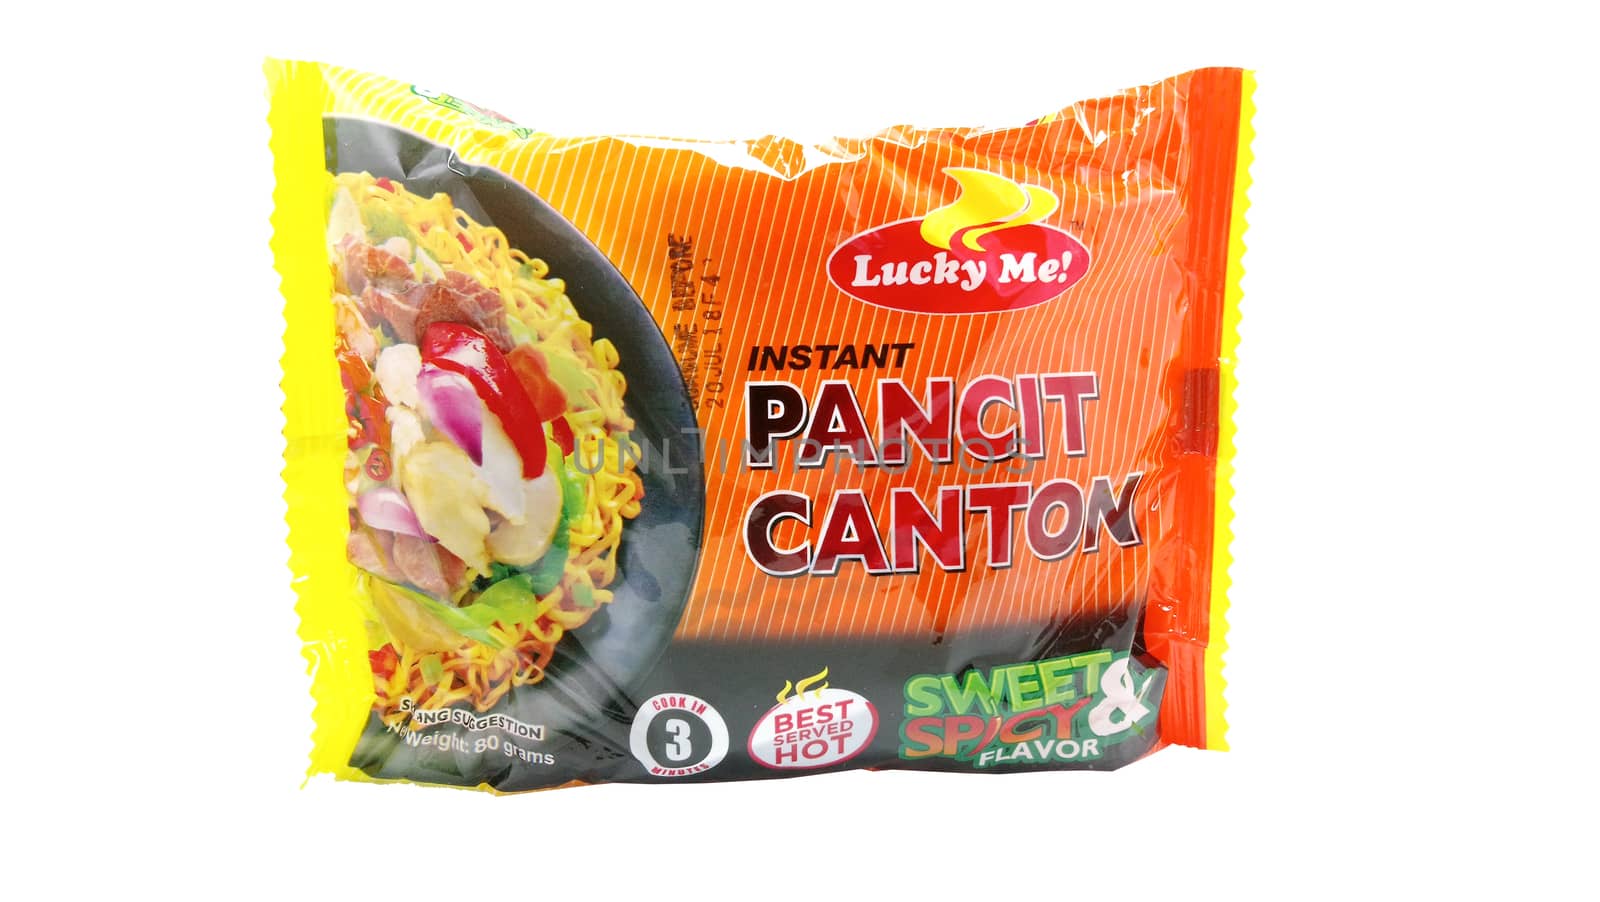 MANILA, PH - JUNE 23 - Lucky me pancit canton noodles on June 23, 2020 in Manila, Philippines.